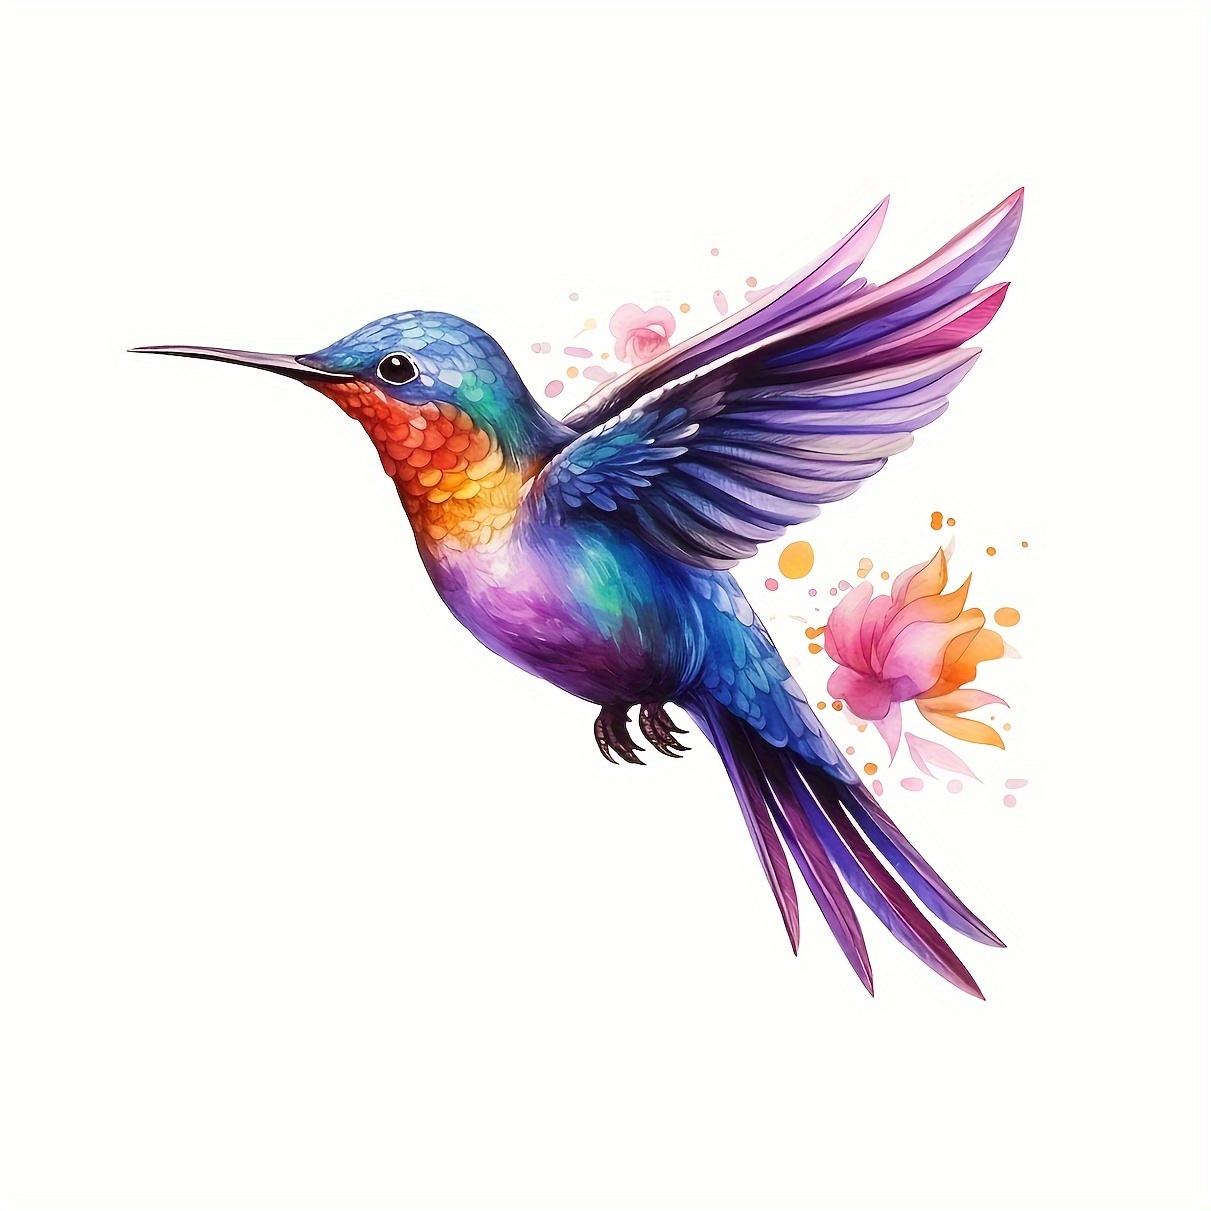 

(upgraded Version, Waterproof And Sunproof) 3d Beautiful Vibrant Colored Hummingbird Art Car Stickers - Suitable For All Vehicles, Motorcycles